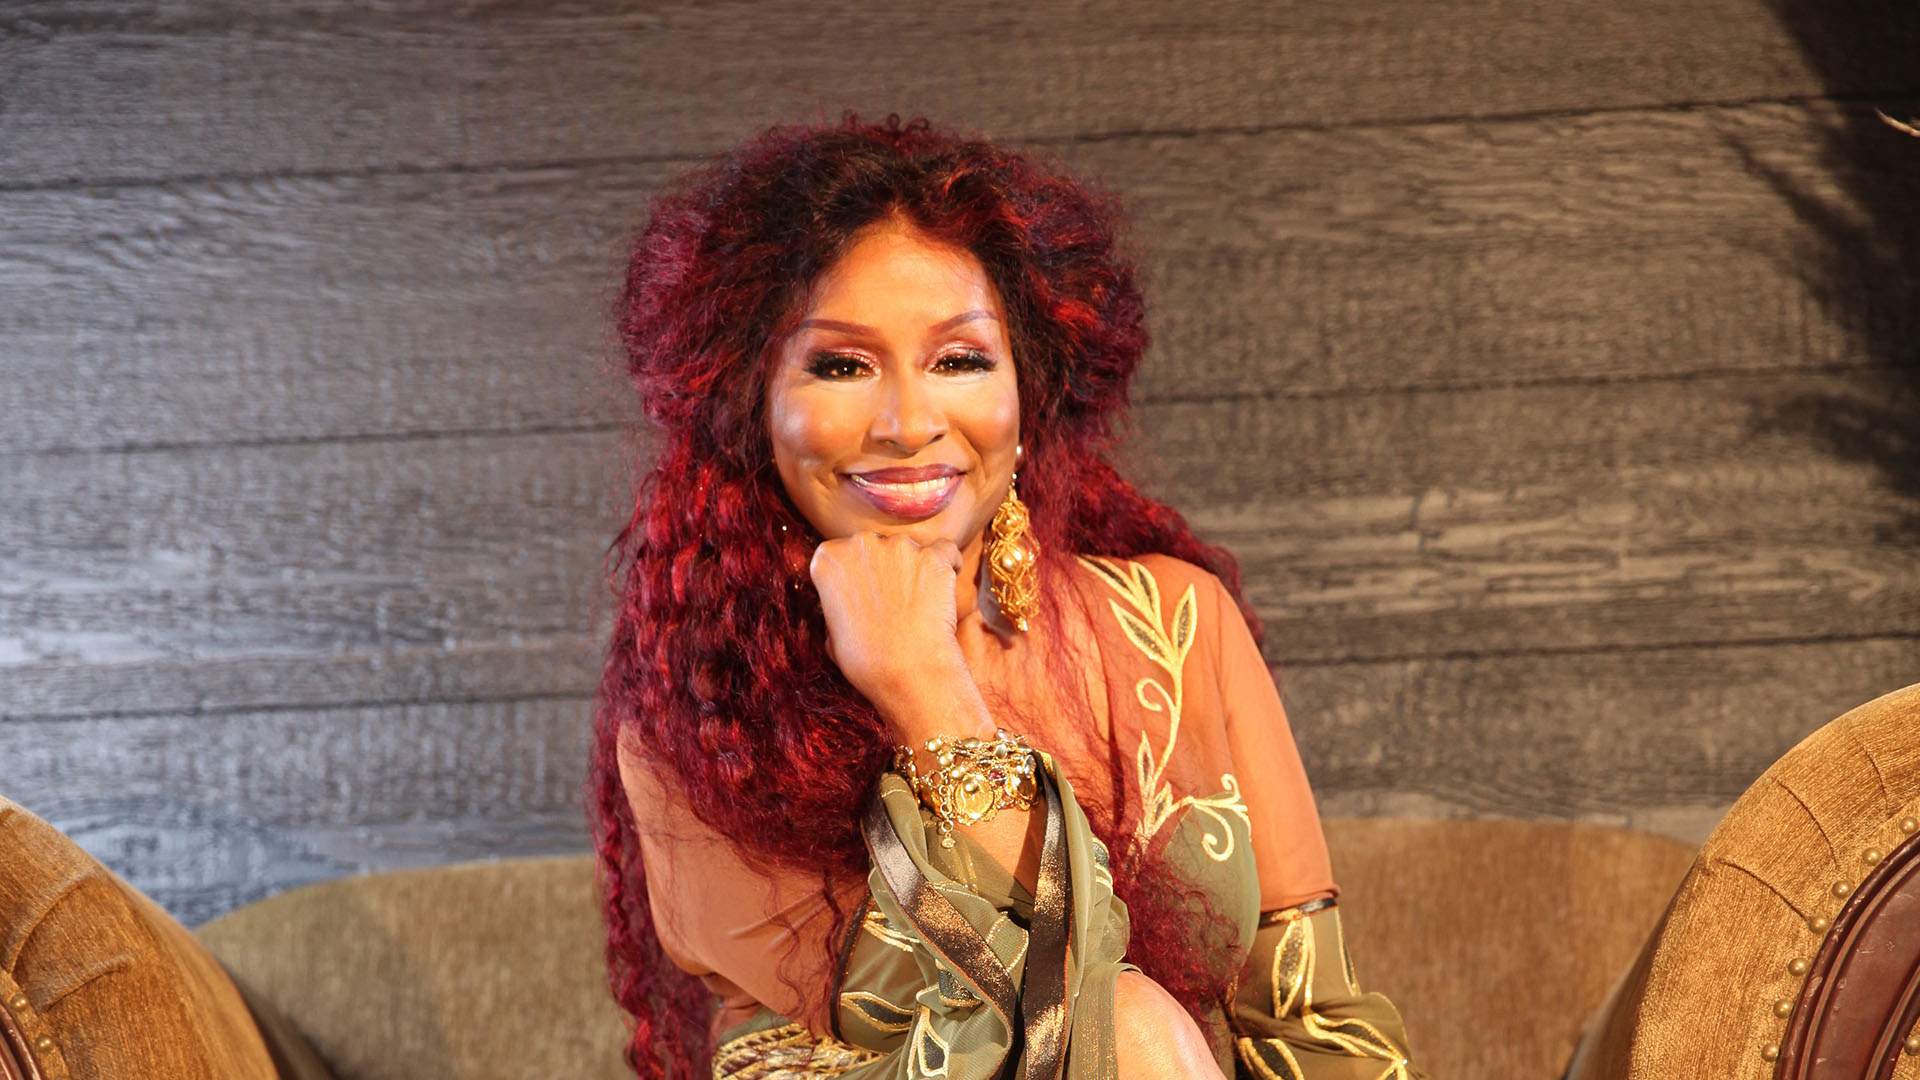 Chaka Khan Is Headlining the 2023 Melbourne International Jazz Festival with Nile Rodgers & Chic